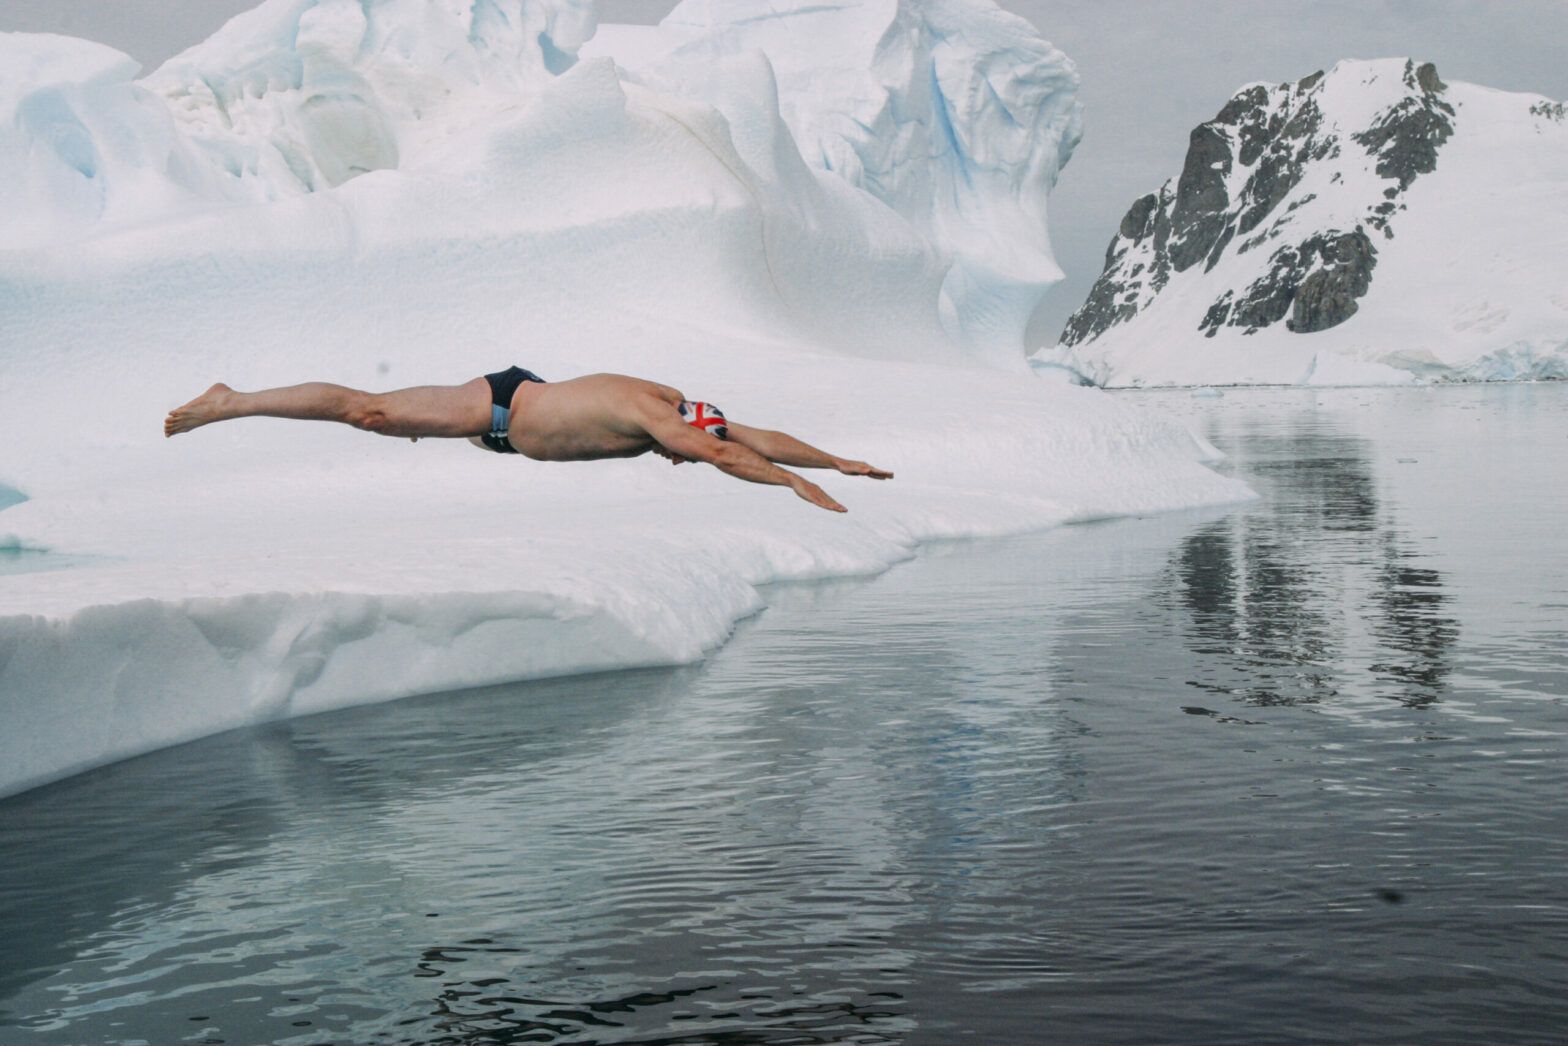 Swimming at Ilulissat shows effects of global warming